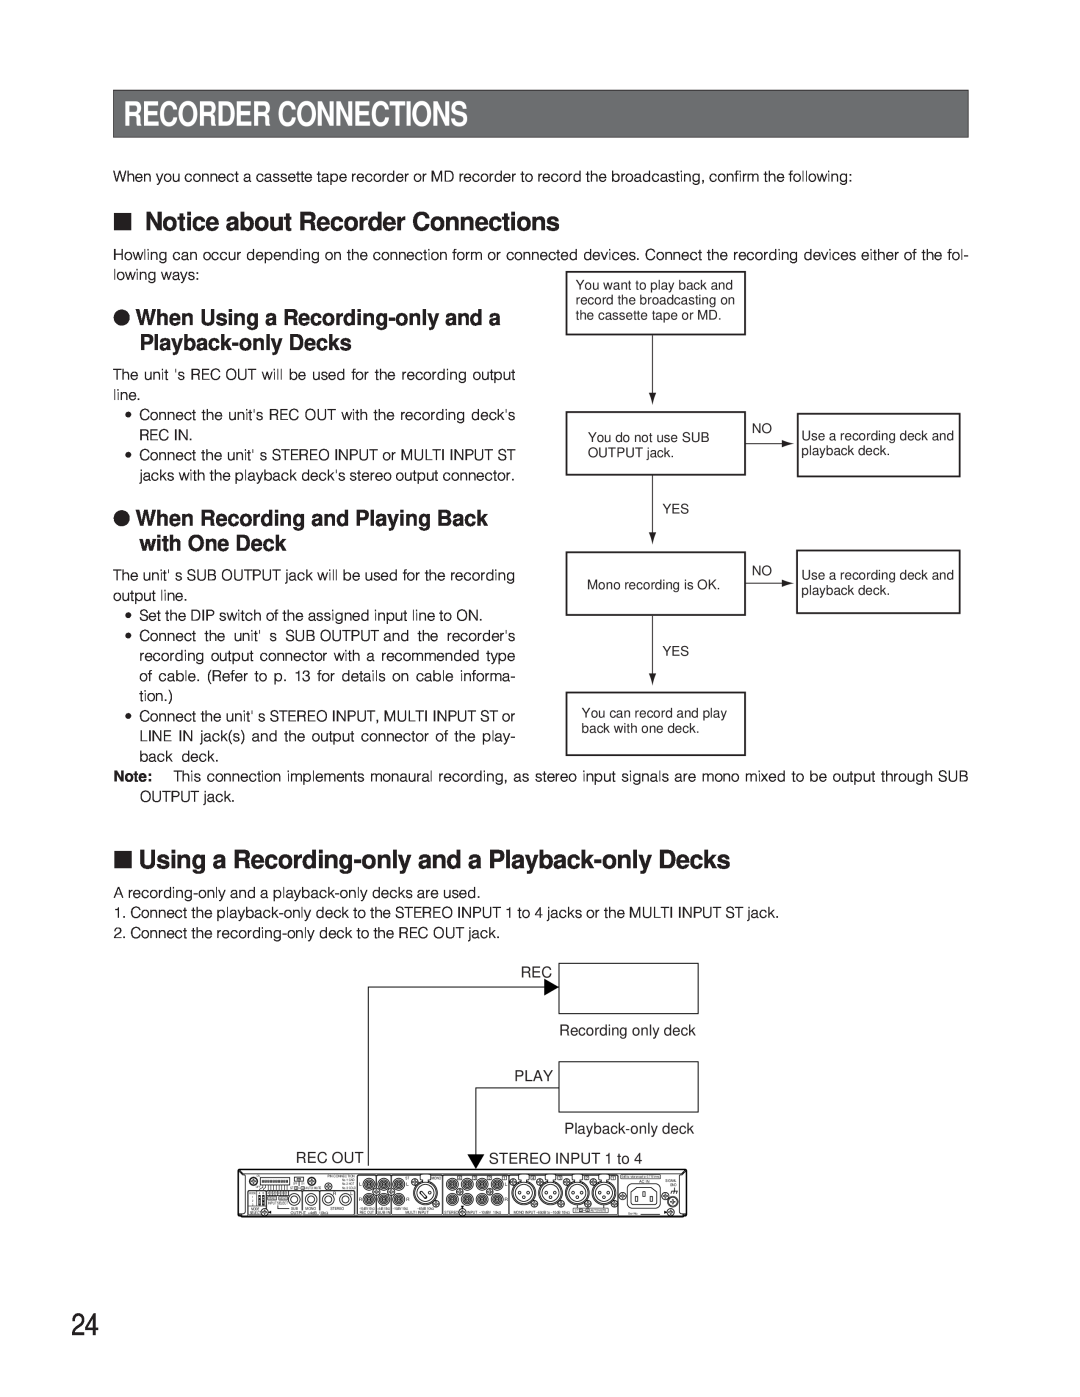 Panasonic WR-XS3P Notice about Recorder Connections, Using a Recording-onlyand a Playback-onlyDecks 